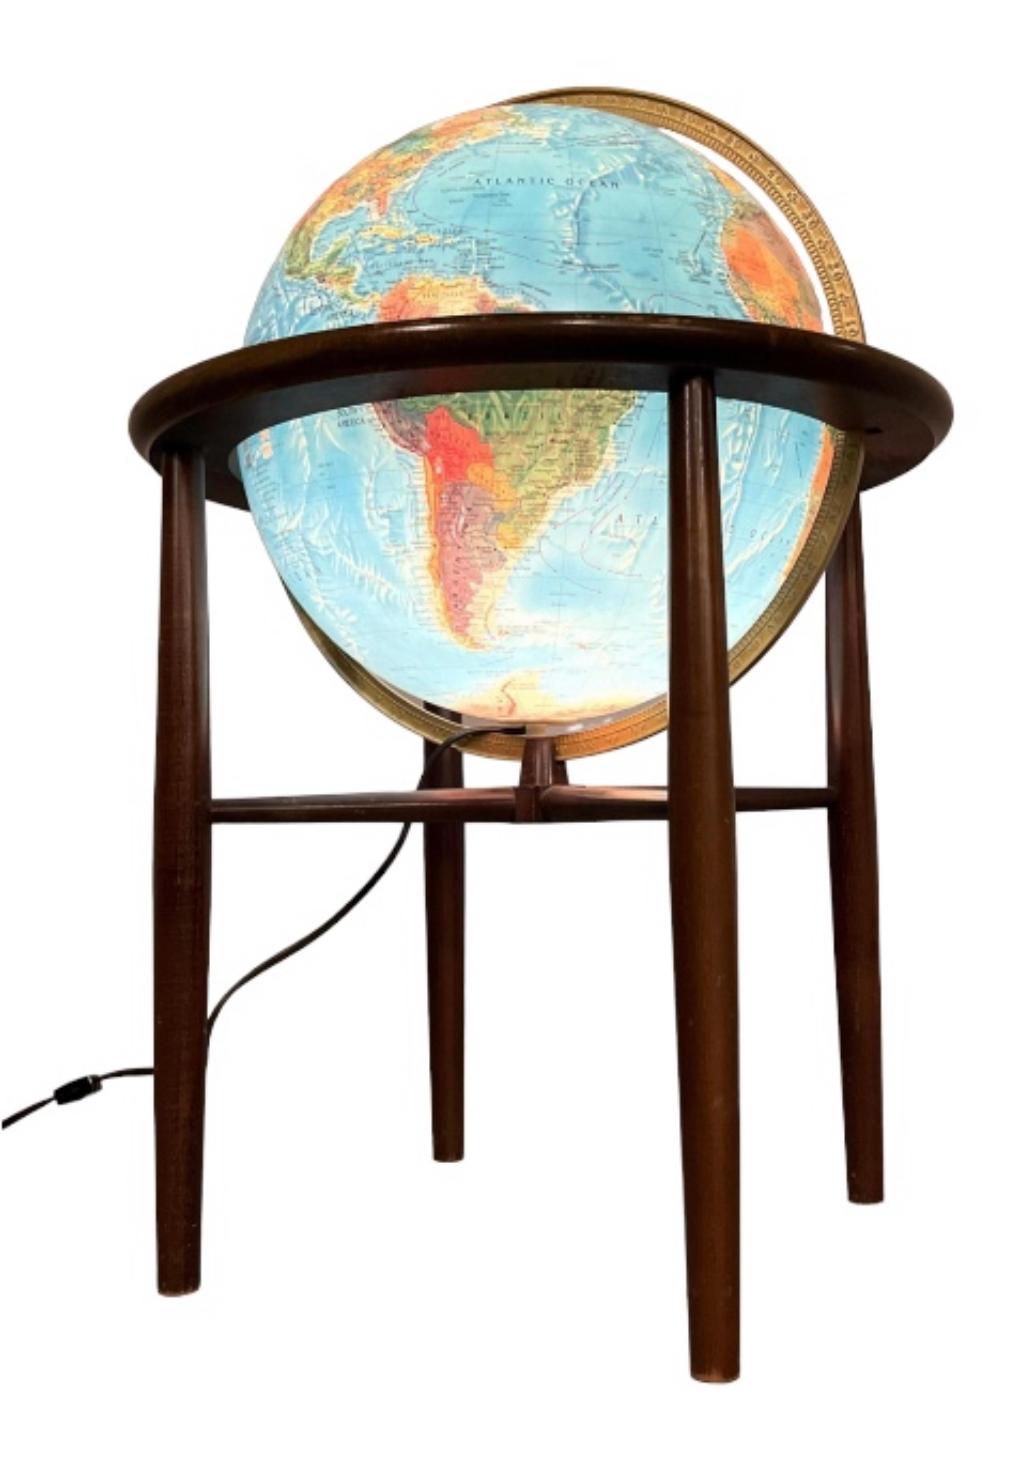 Midcentury Modern Replogle Illuminated Glow Globe on Wood Stand In Good Condition For Sale In Brooklyn, NY